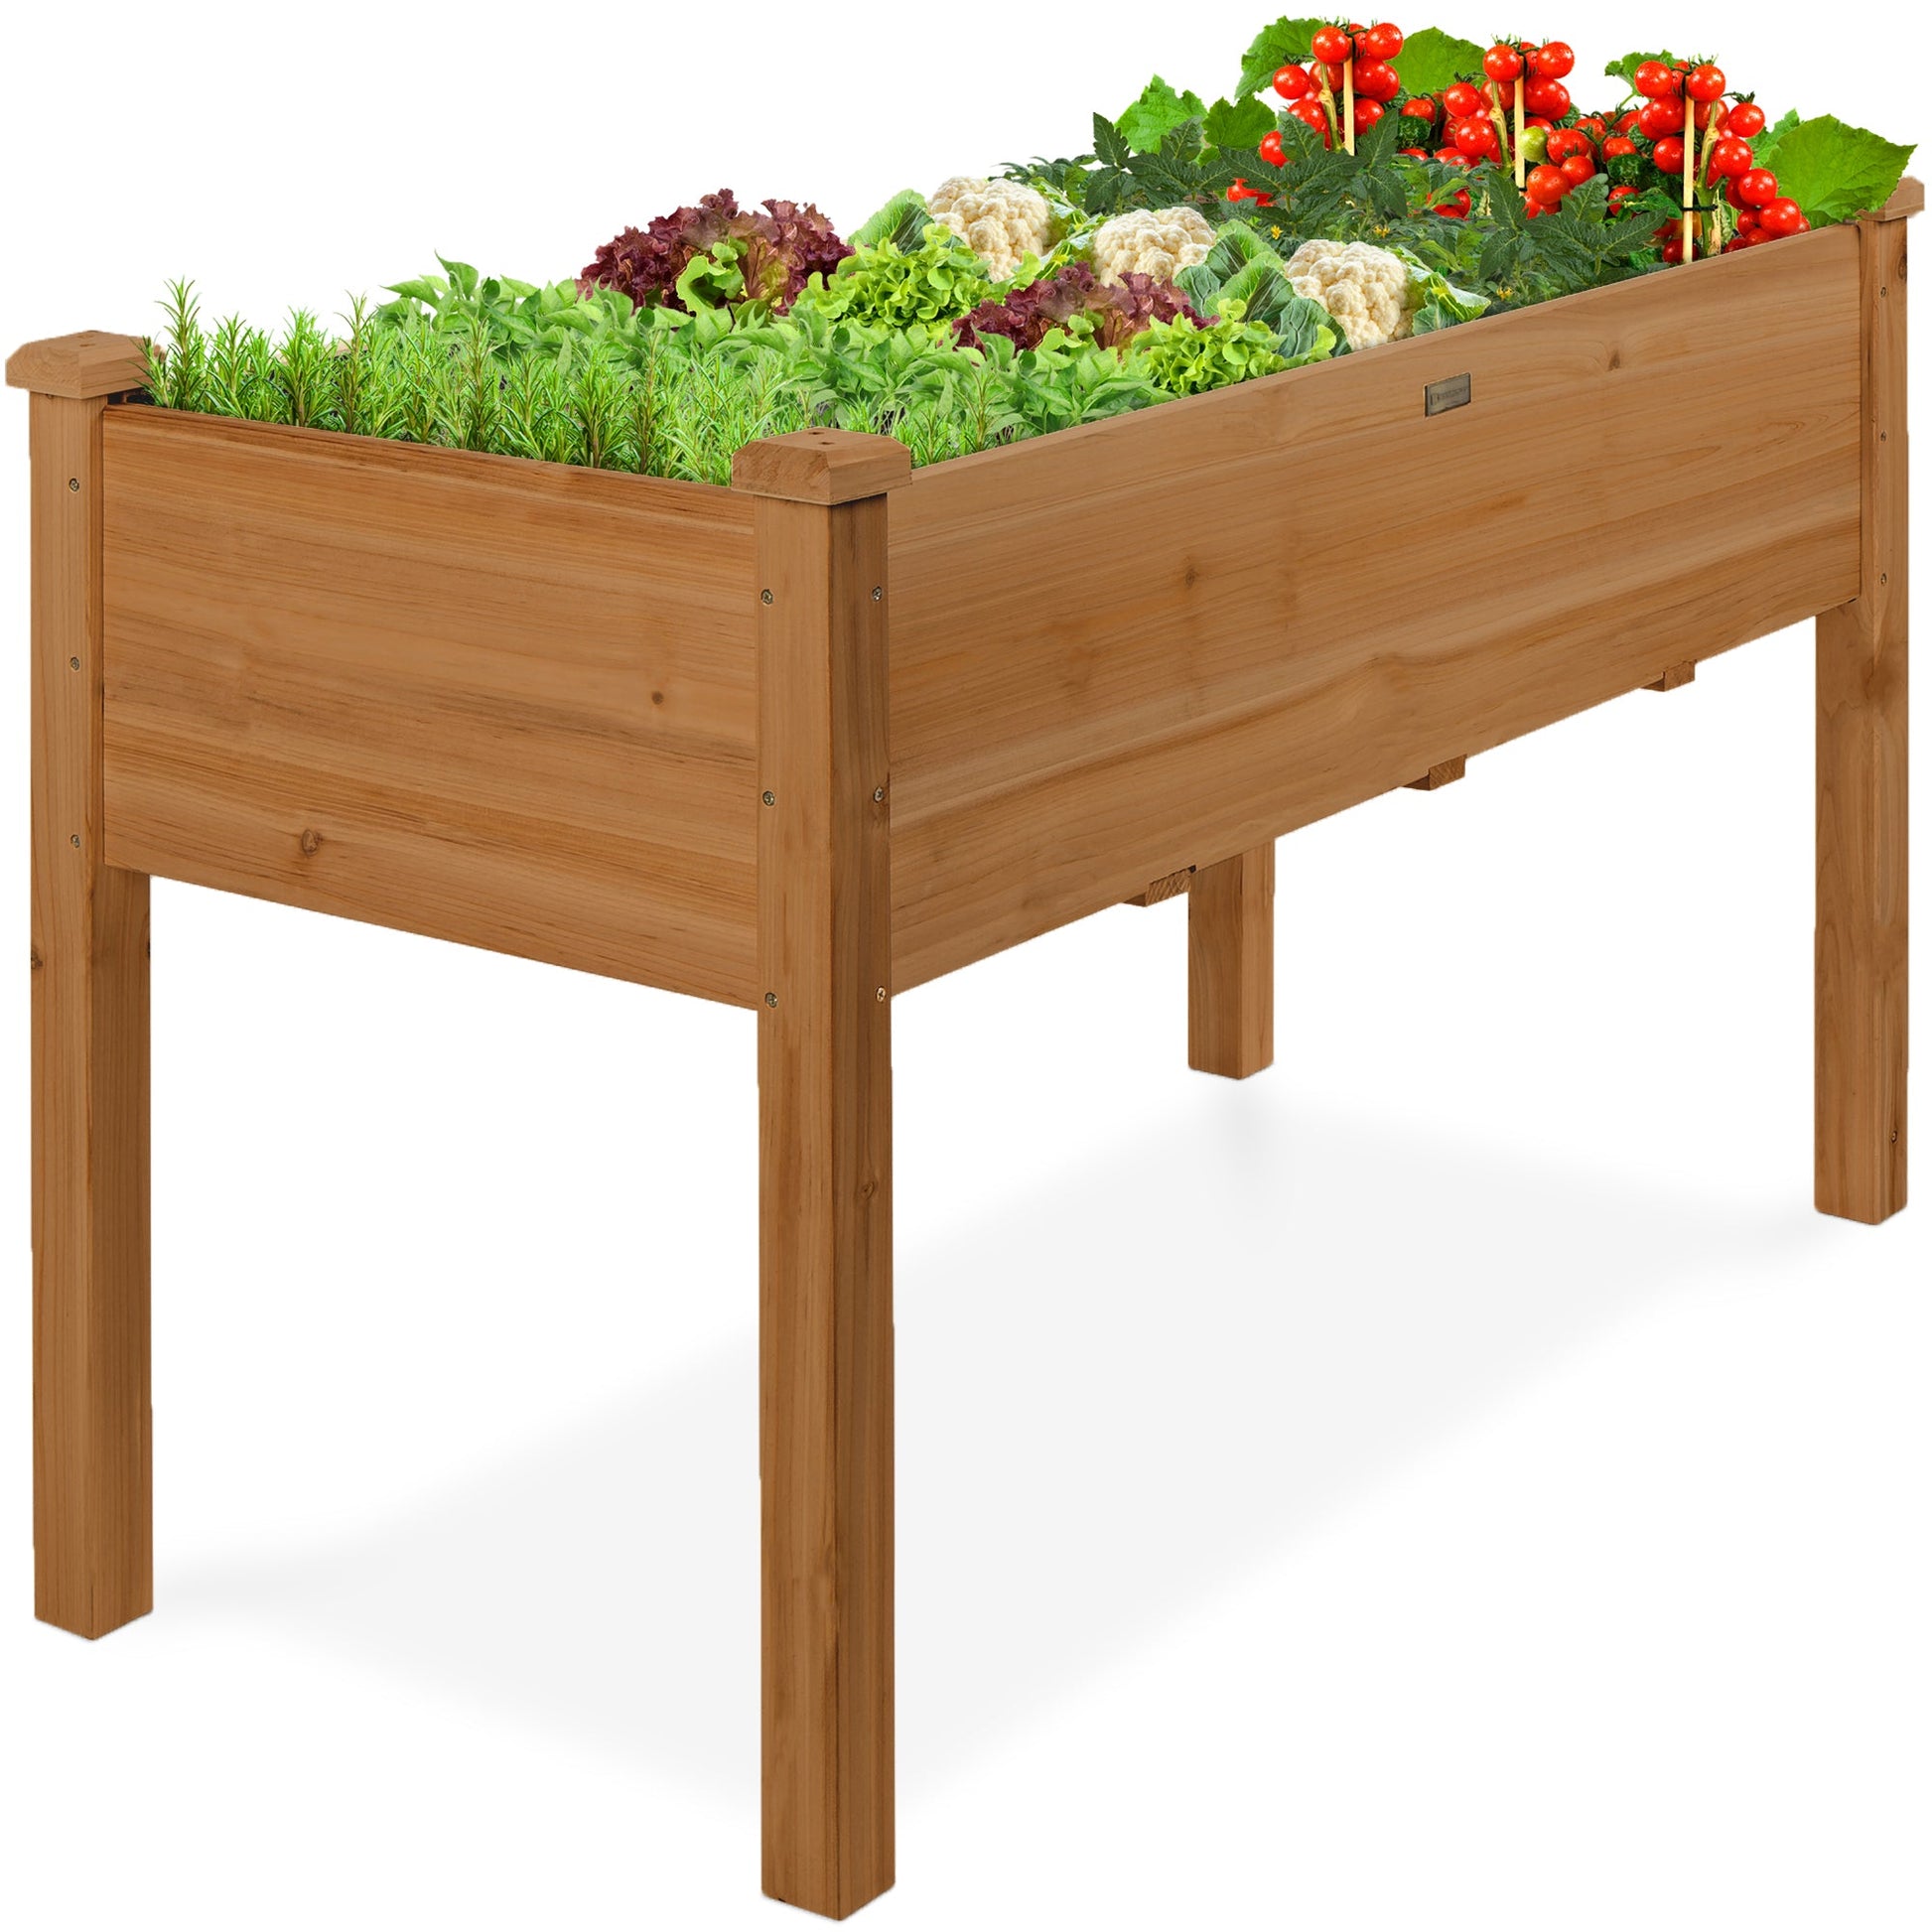 Raised Garden Bed, Elevated Wooden Planter Box w/ Foot Caps - 48x24x30in